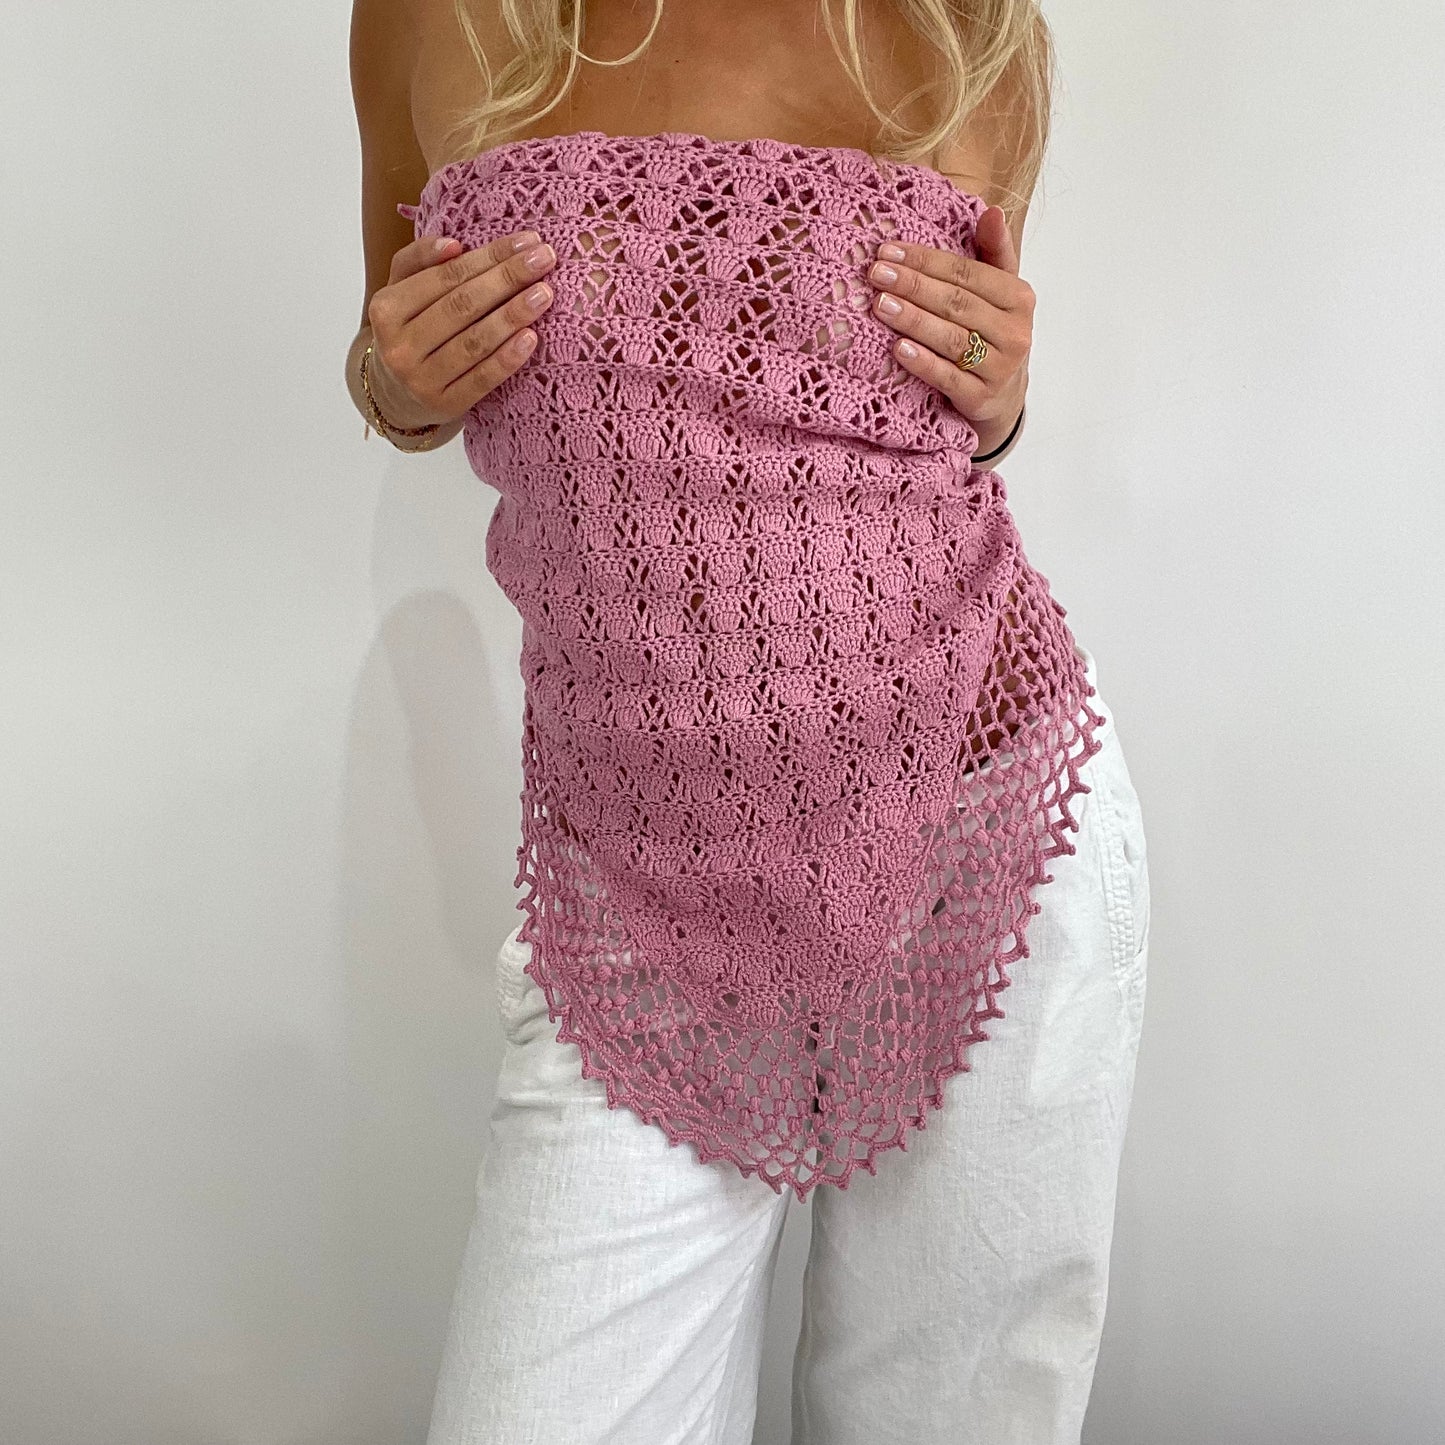 MODEL OFF DUTY DROP | pink crochet knitted scarf tie up backless top